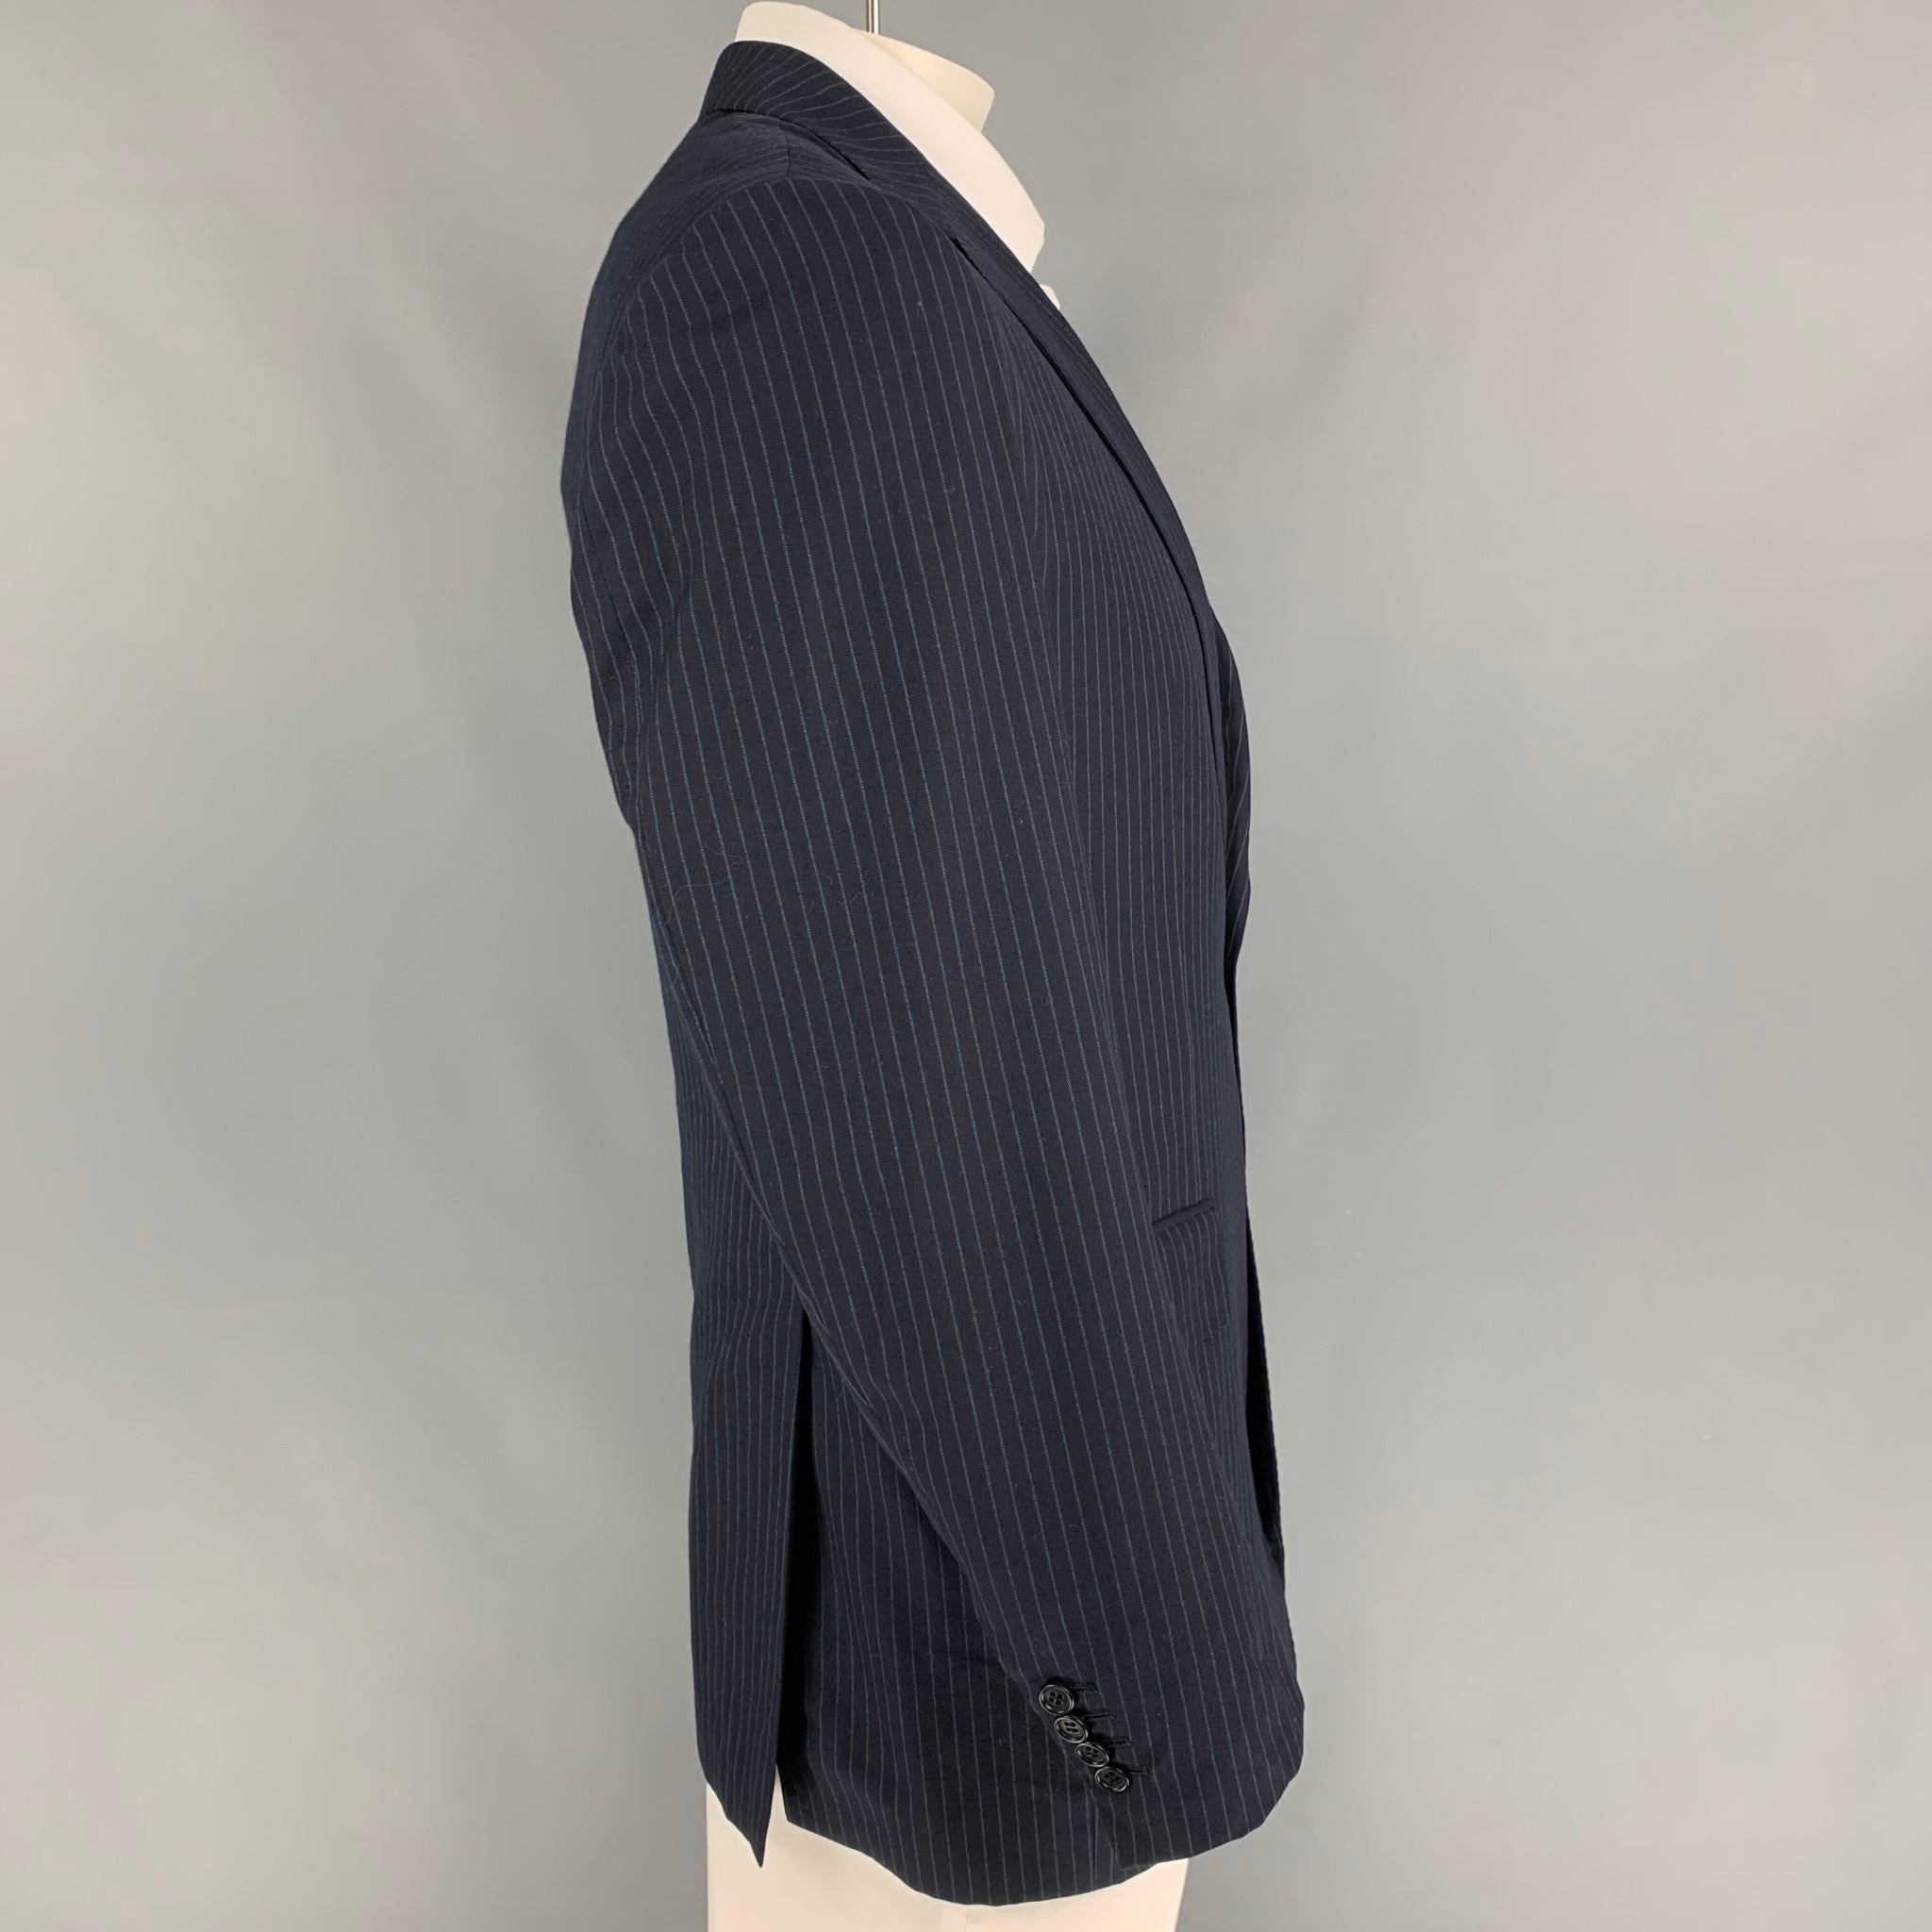 KITON for NEIMAN MARCUS sport coat comes in a navy & white pinstripe wool with a full liner featuring a notch lapel, flap pockets, double back vent, and a double button closure. Made in Italy. 

Very Good Pre-Owned Condition.
Marked: